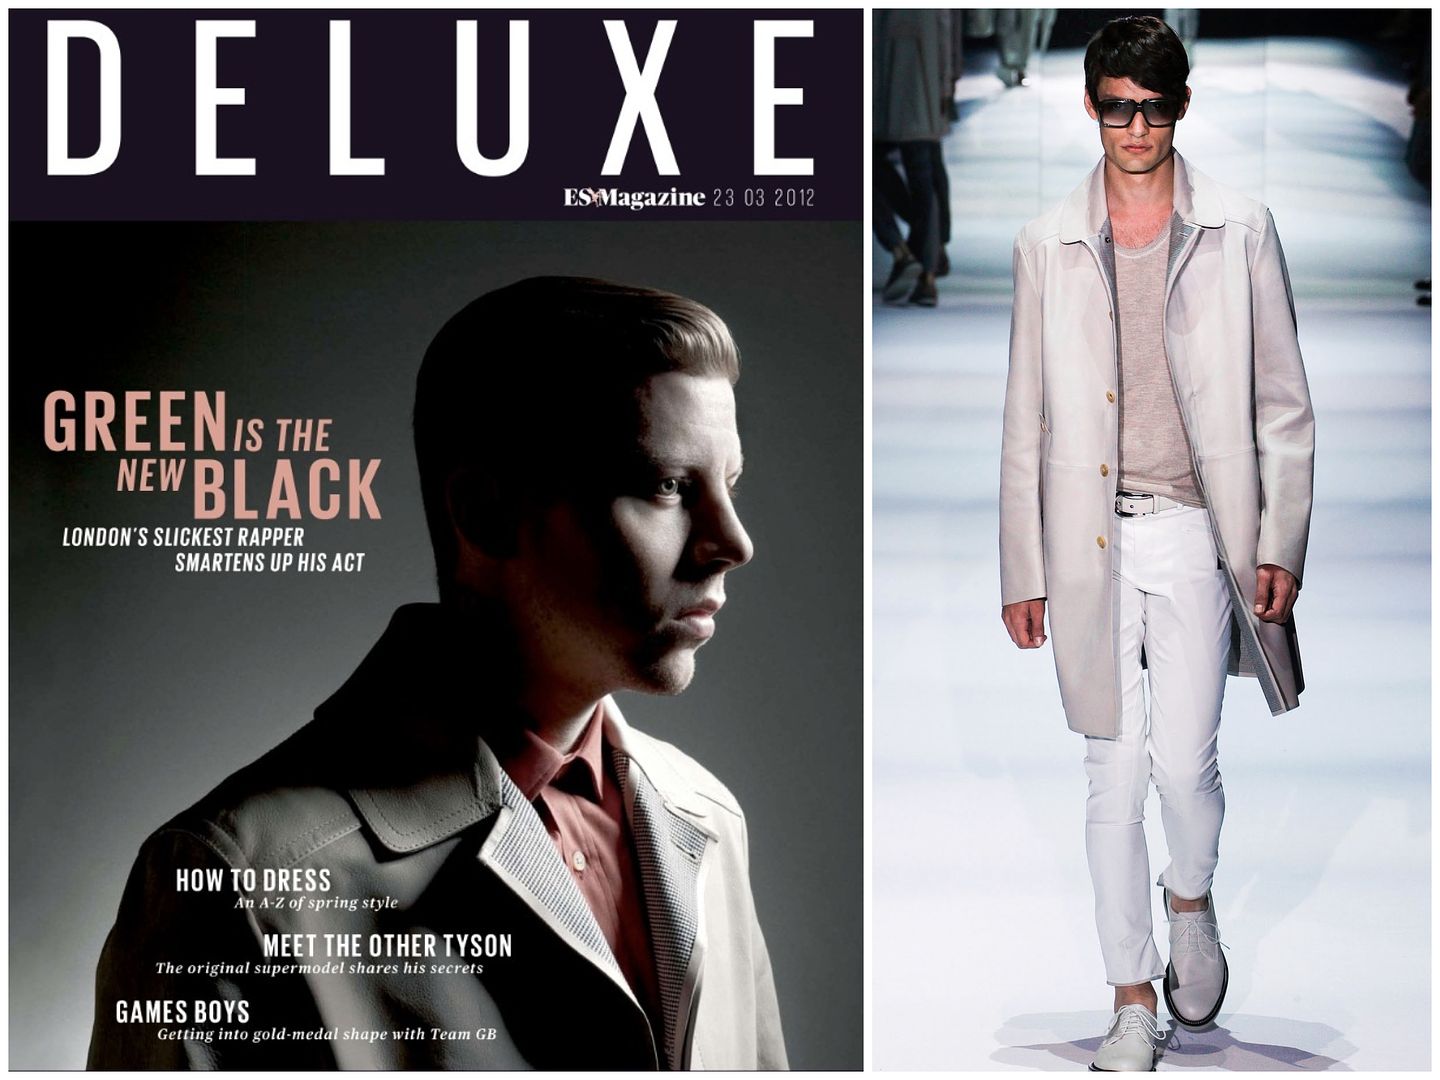 What's he wearing?: Professor Green in Gucci - ES Magazine DELUXE Issue